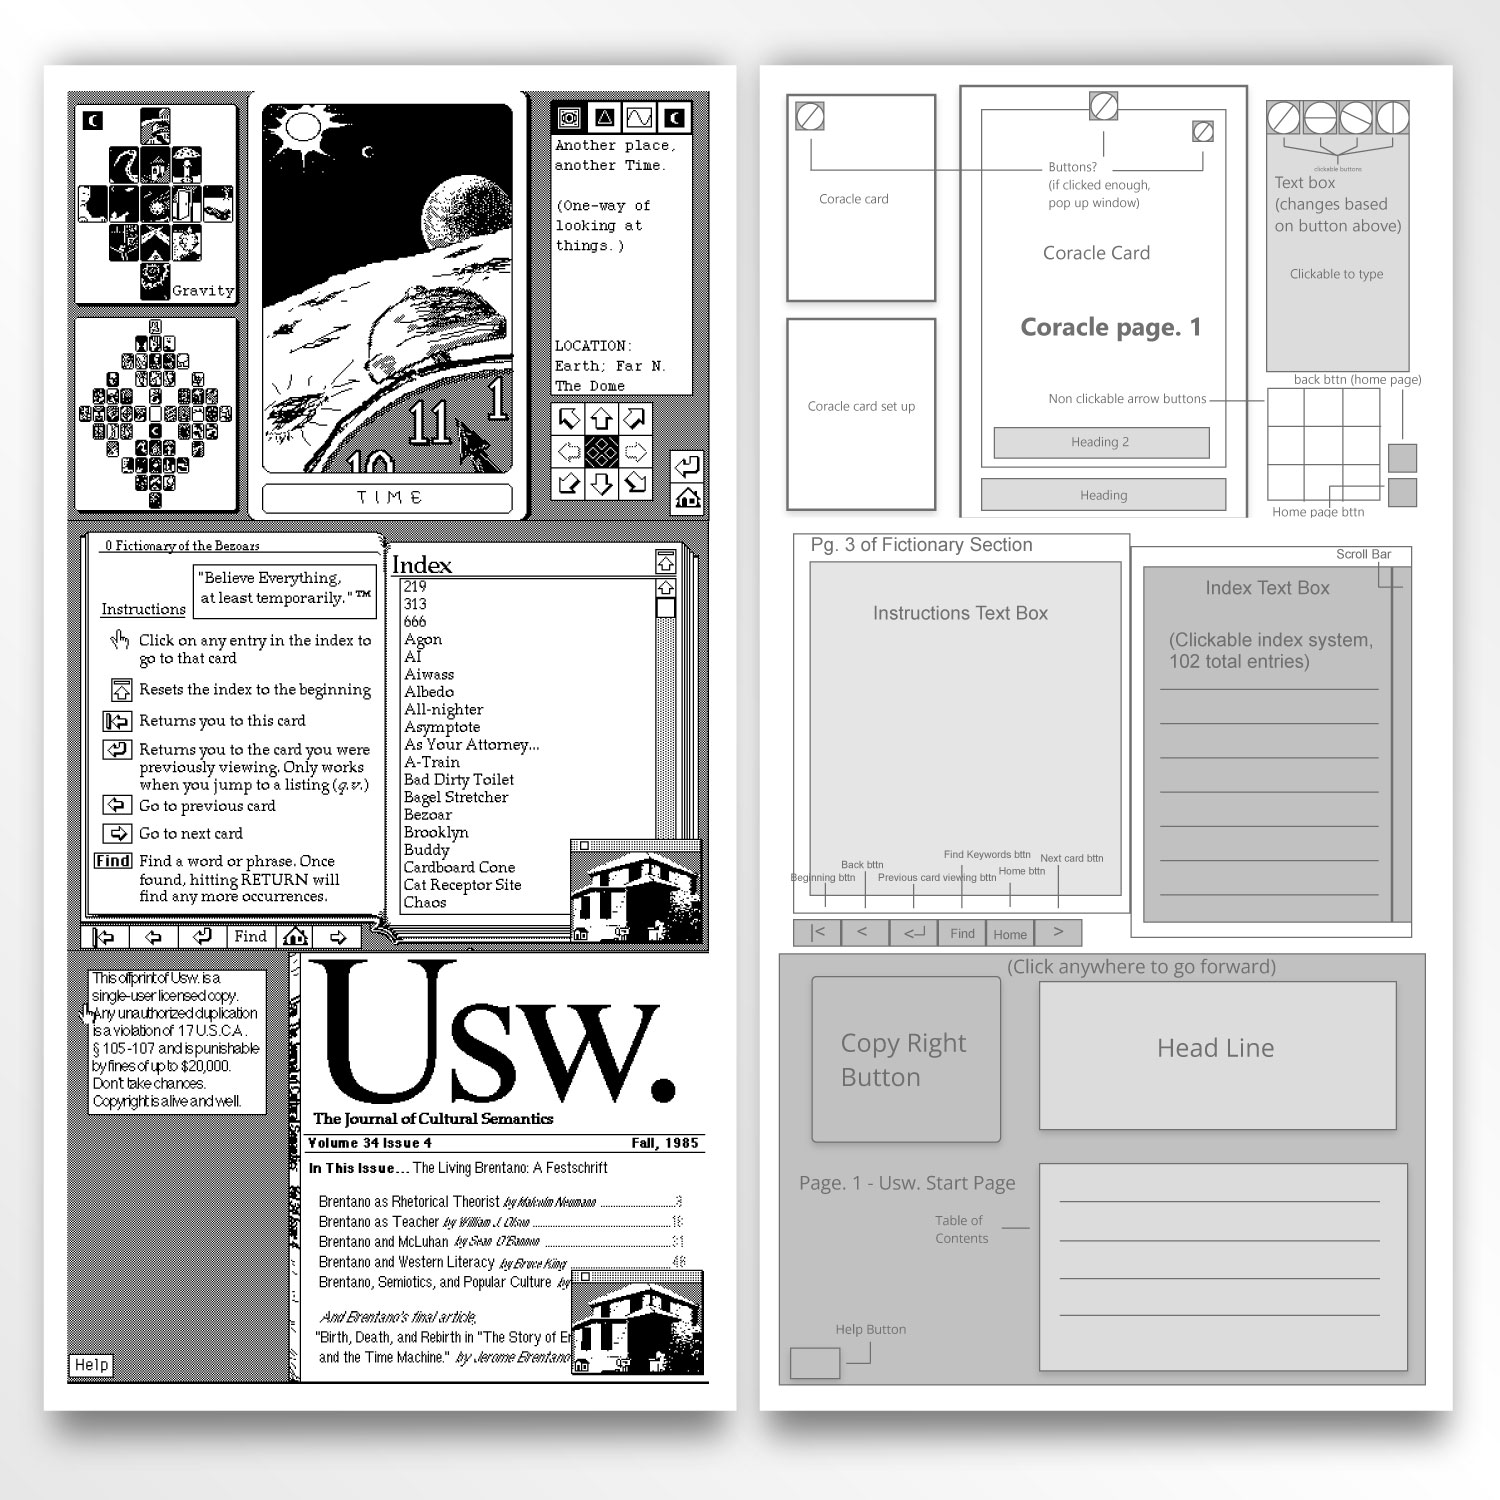 The mapping and wireframes of user interactions and layour of the original 1993 hypercard game, Uncle Buddy's Phantom Funhouse